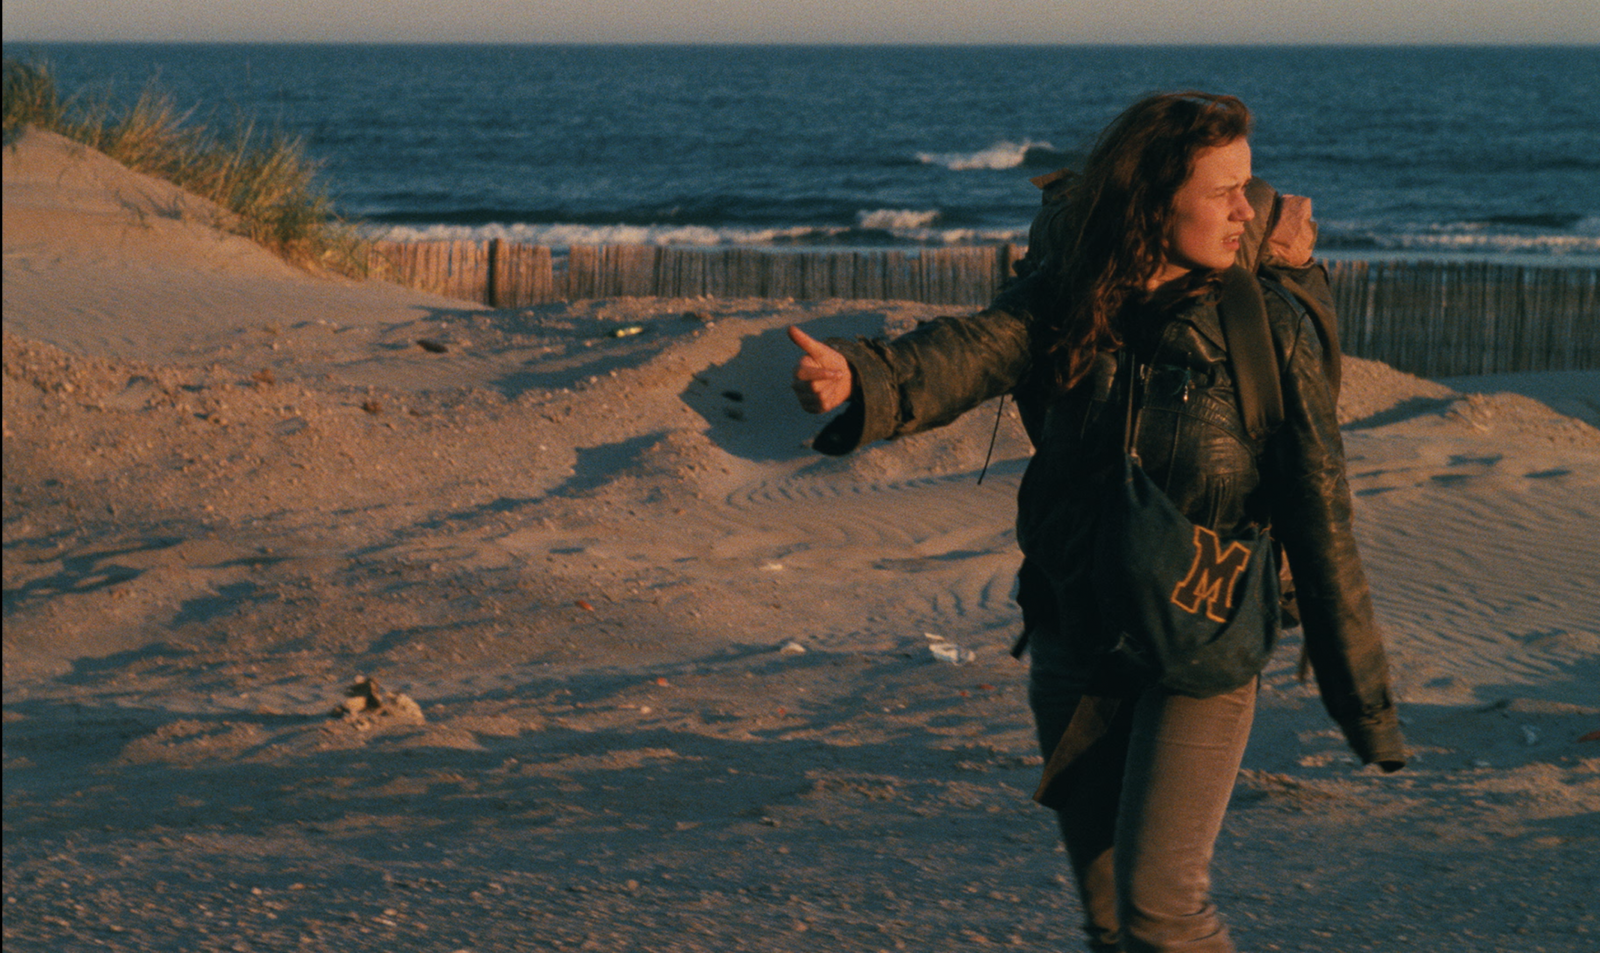 In this color still from Agnès Varda's 1985 film, Vagabond, a young woman (played by Sandrine Bonnaire) is hitchhiking at a beach. She's standing right of center in the foreground, her right arm stretched out and thumb pointing. She is looking back, presumably at a road (one that we do not see) to scan it for a potential ride. Her hair is long and tangled. She's wearing grimy jeans and a dirty leather jacket that looks too big. Along with having a heavy rucksack on her back, she's carrying a cloth bag with a stenciled "M" outlined in orange thread over her shoulder. There are tufts of sea grass and the ocean in the background.